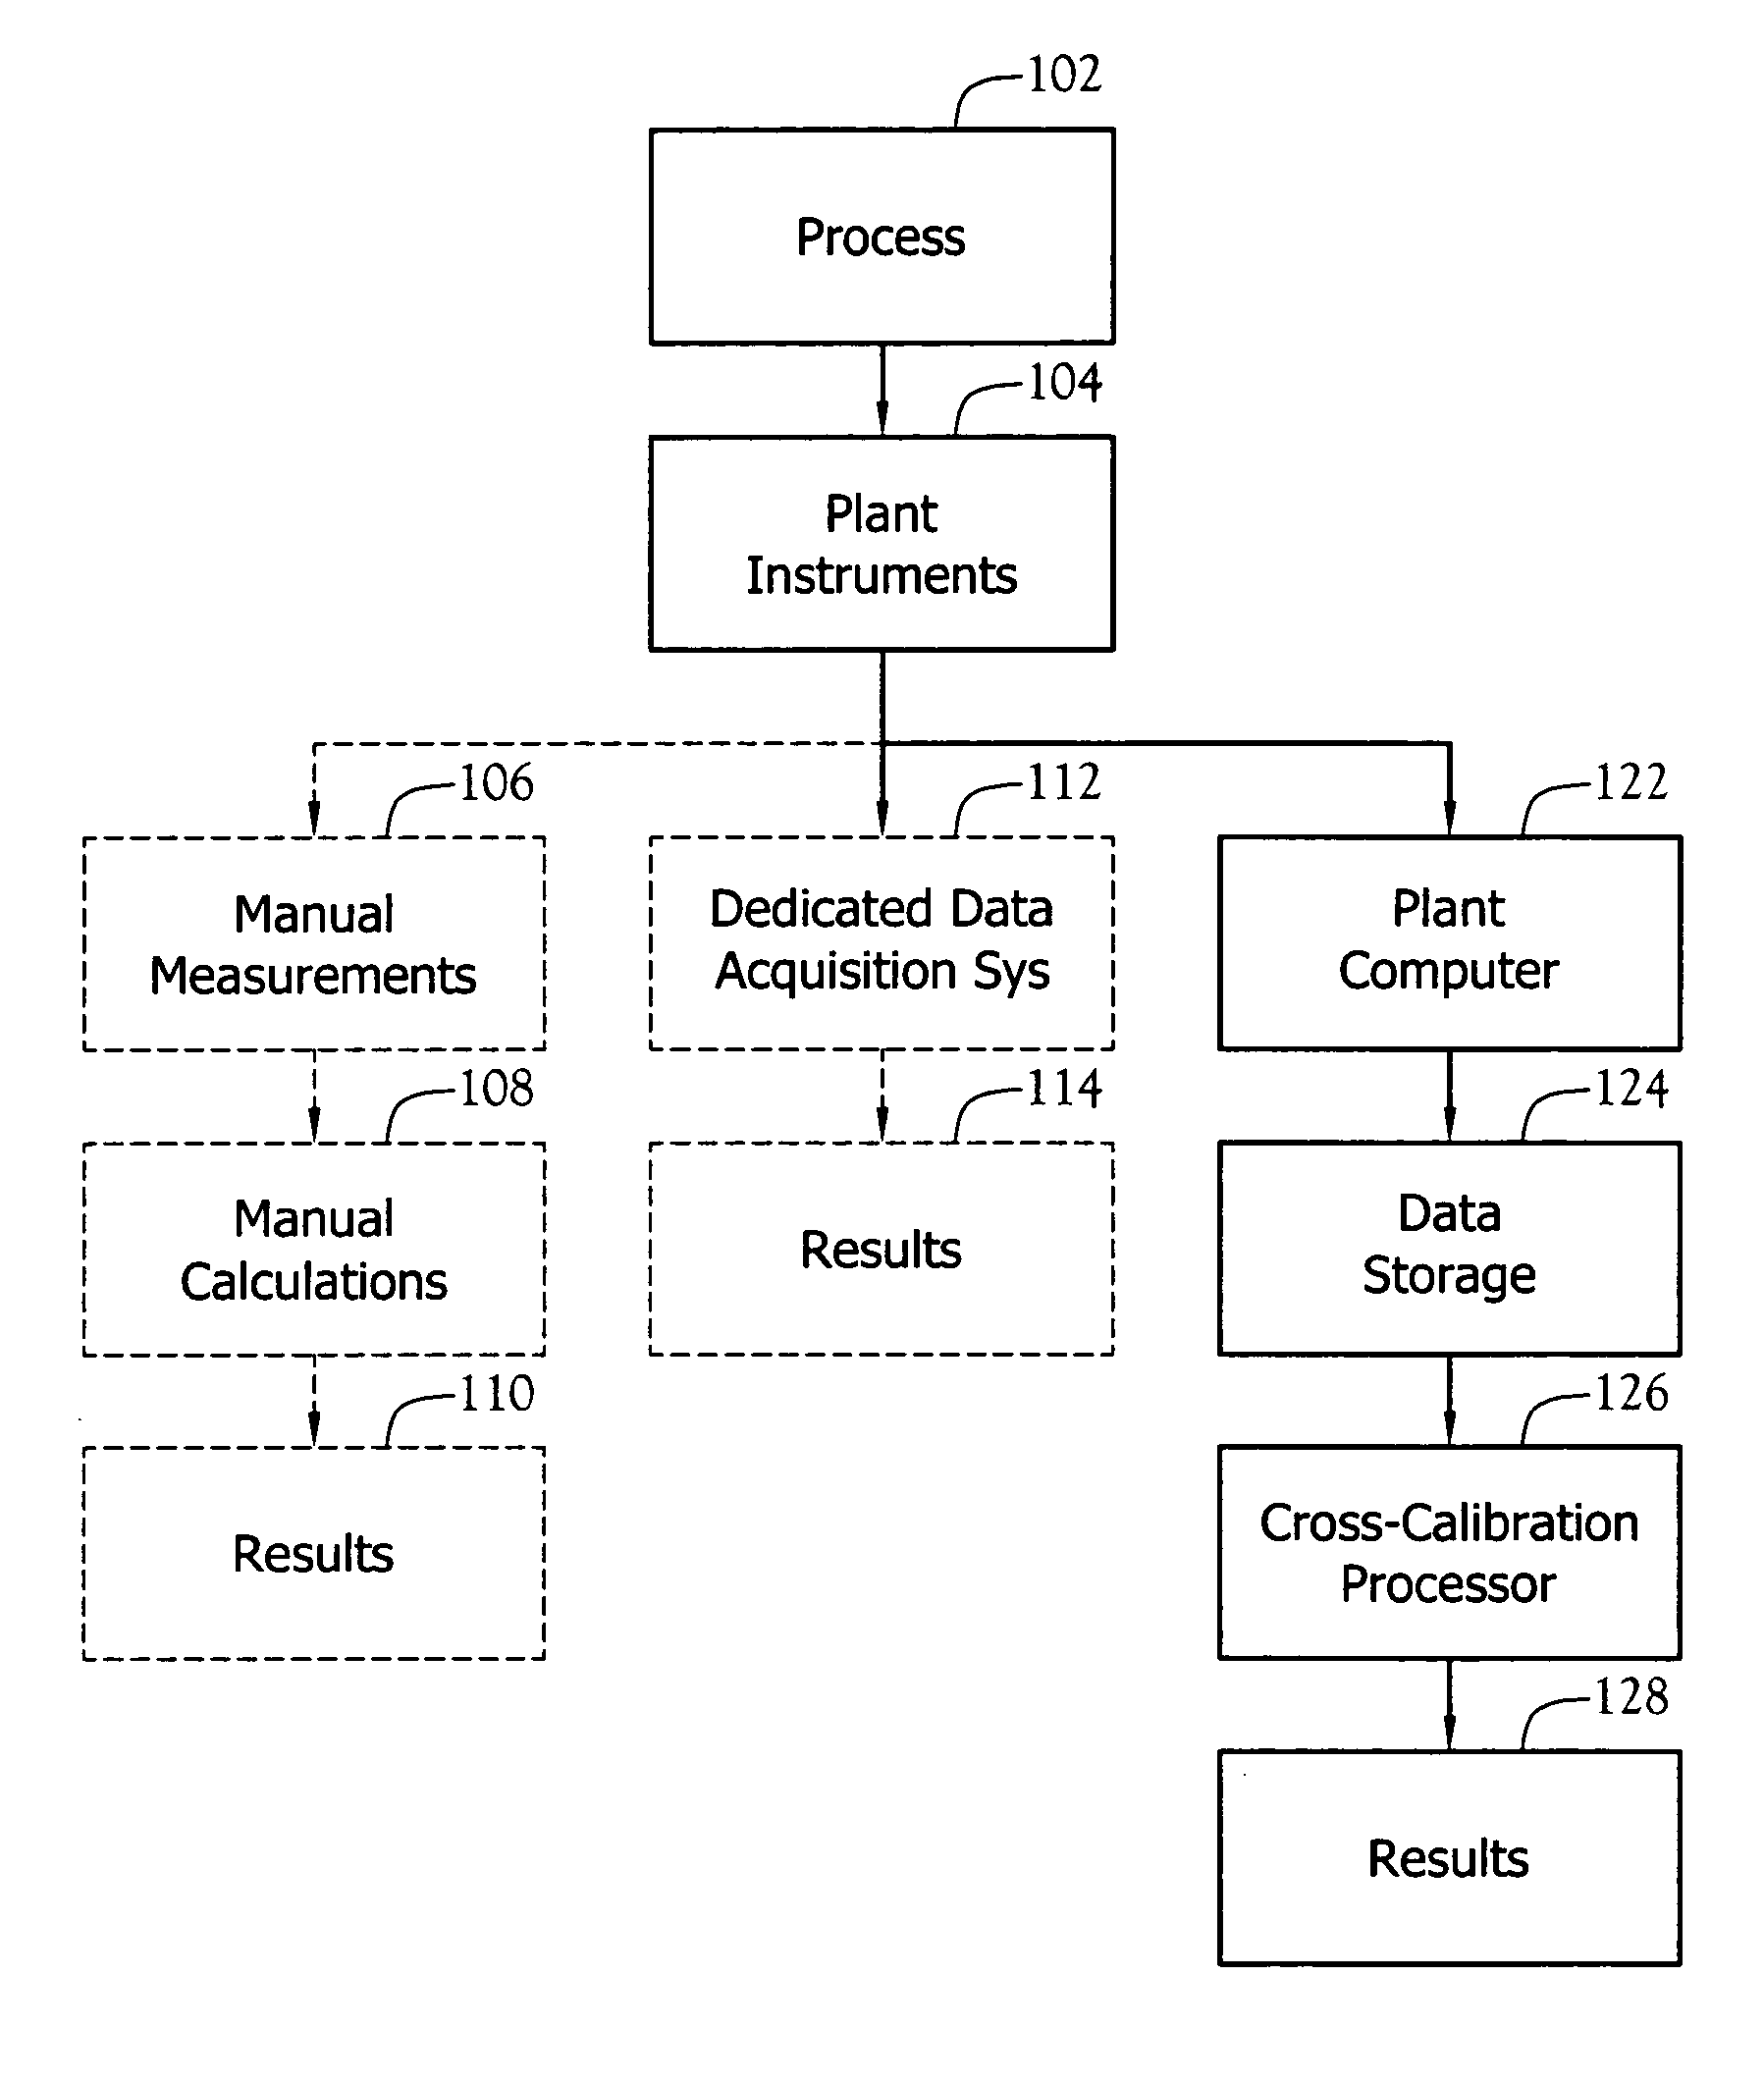 Cross-calibration of plant instruments with computer data